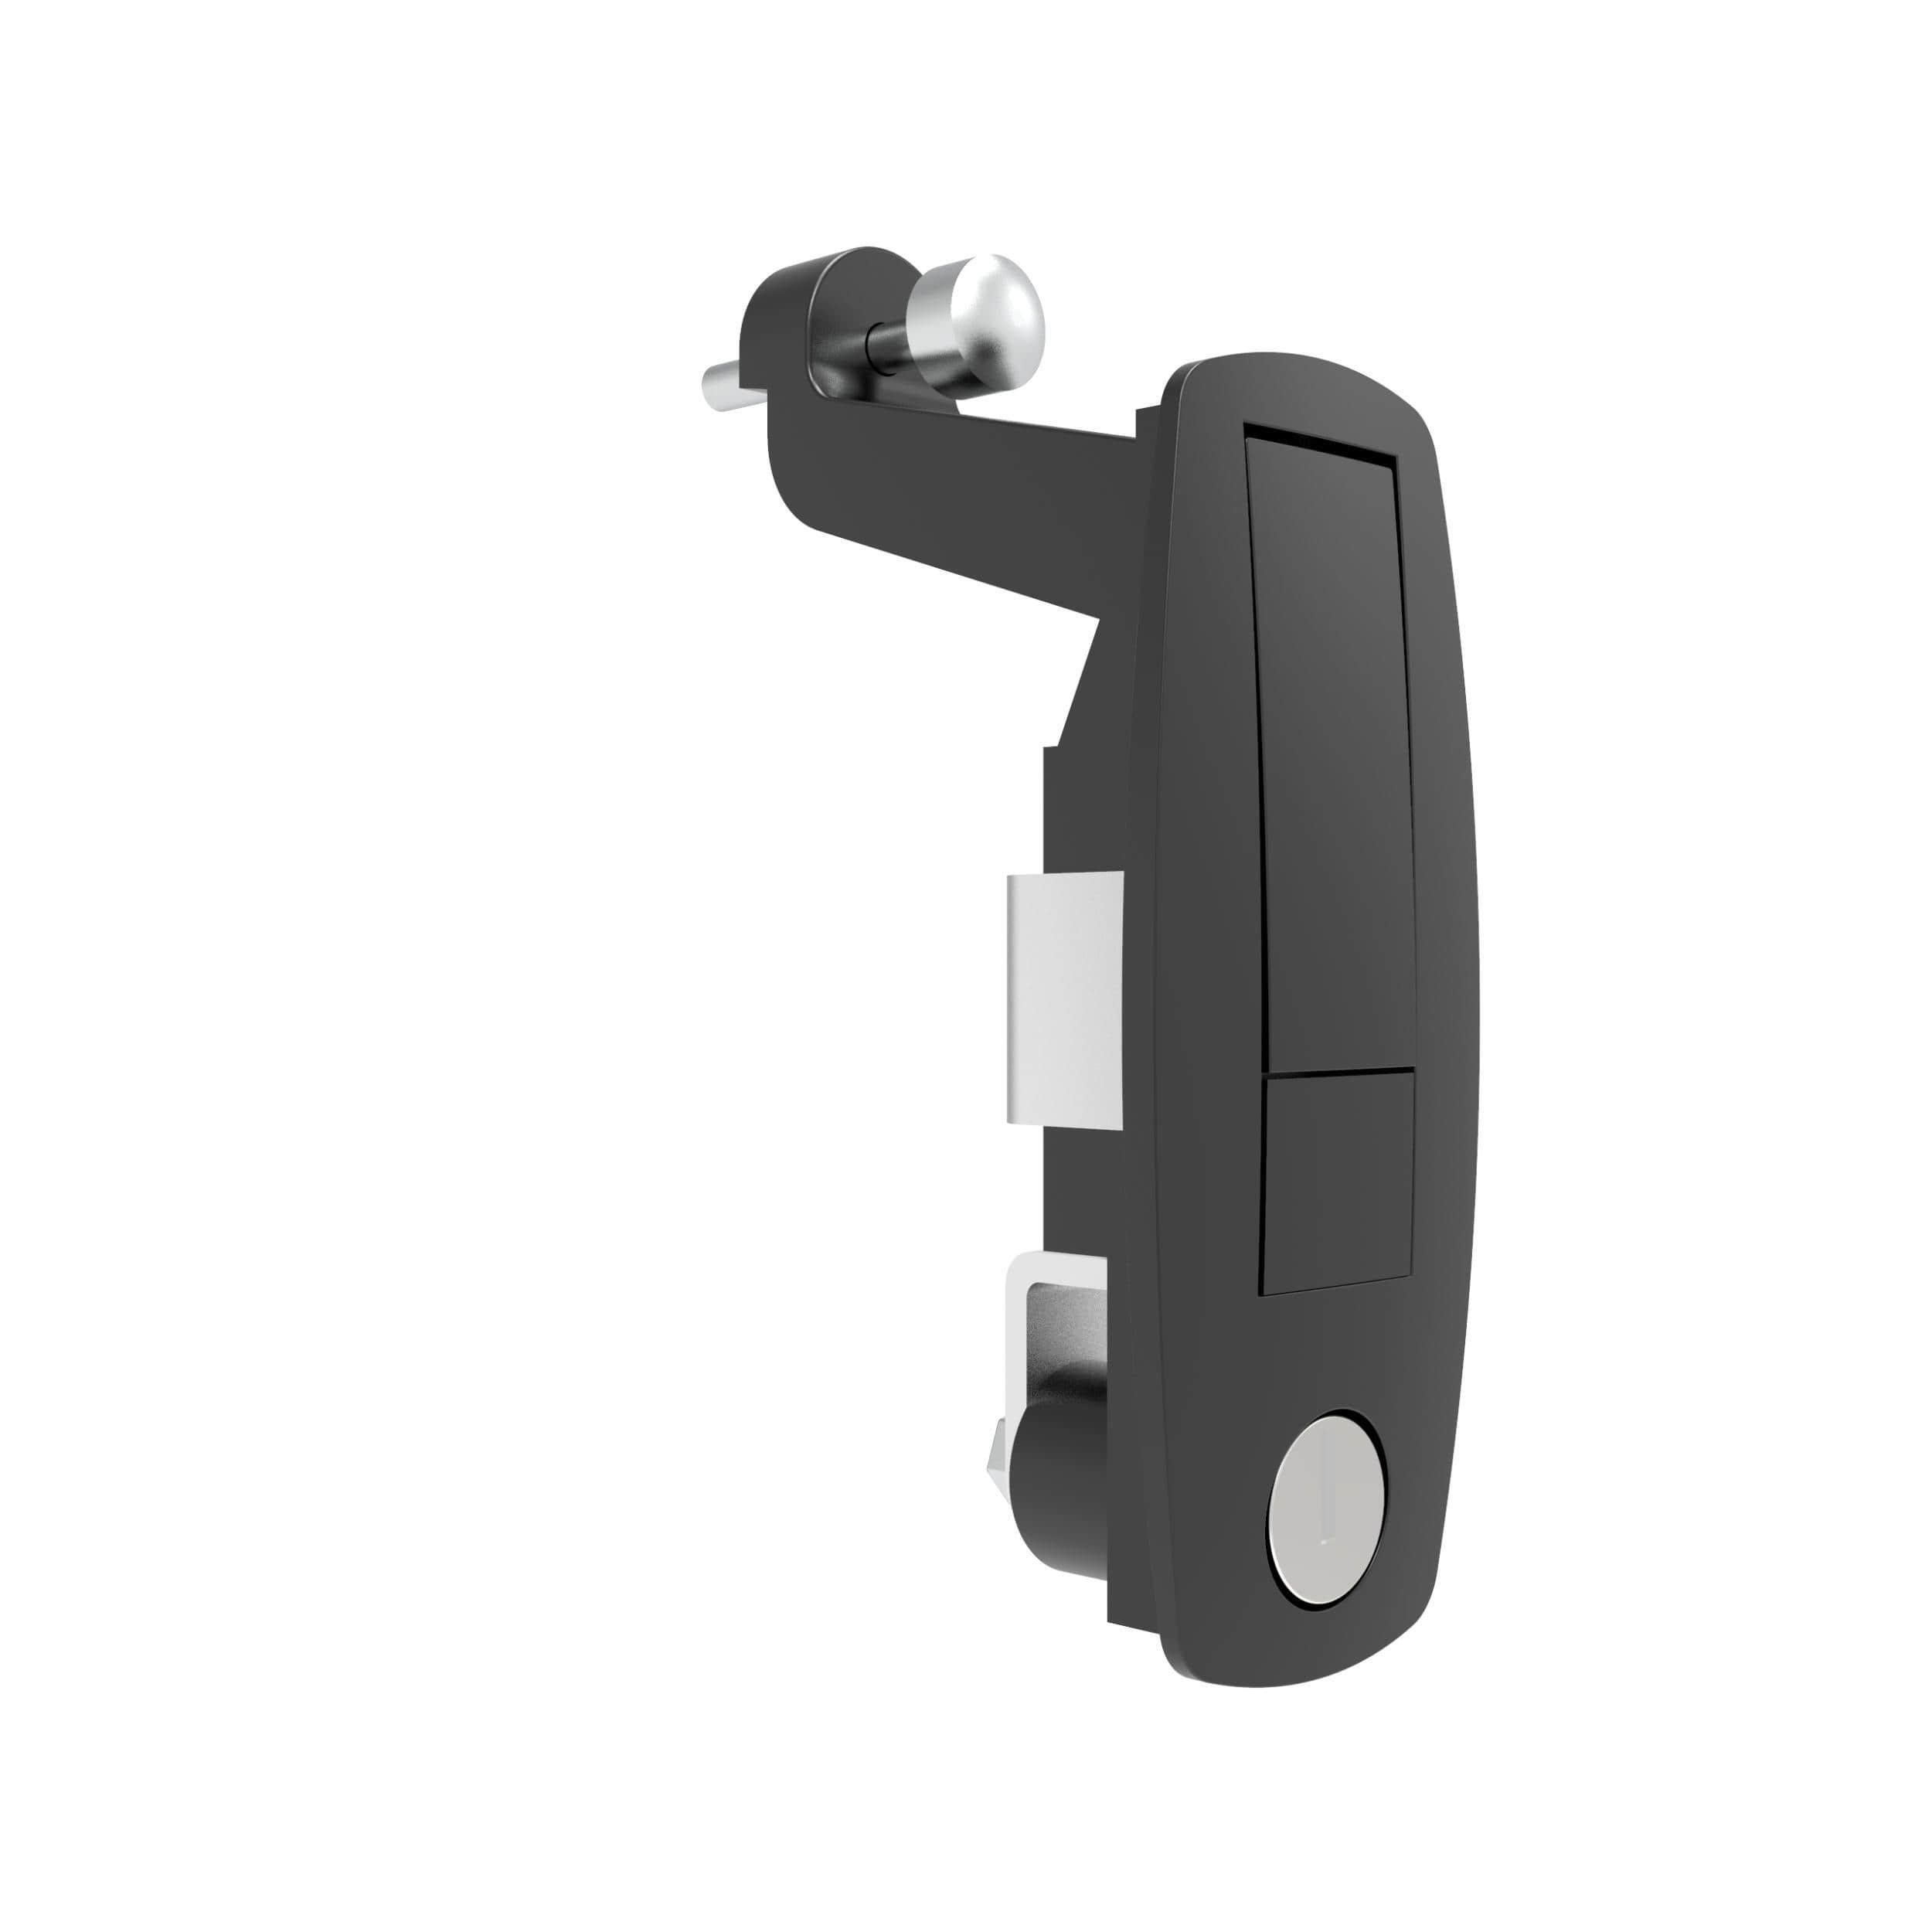 A-1444-110-40 | Compression door lock, lever, with lock, unsealed, zinc alloy, powder coated, black